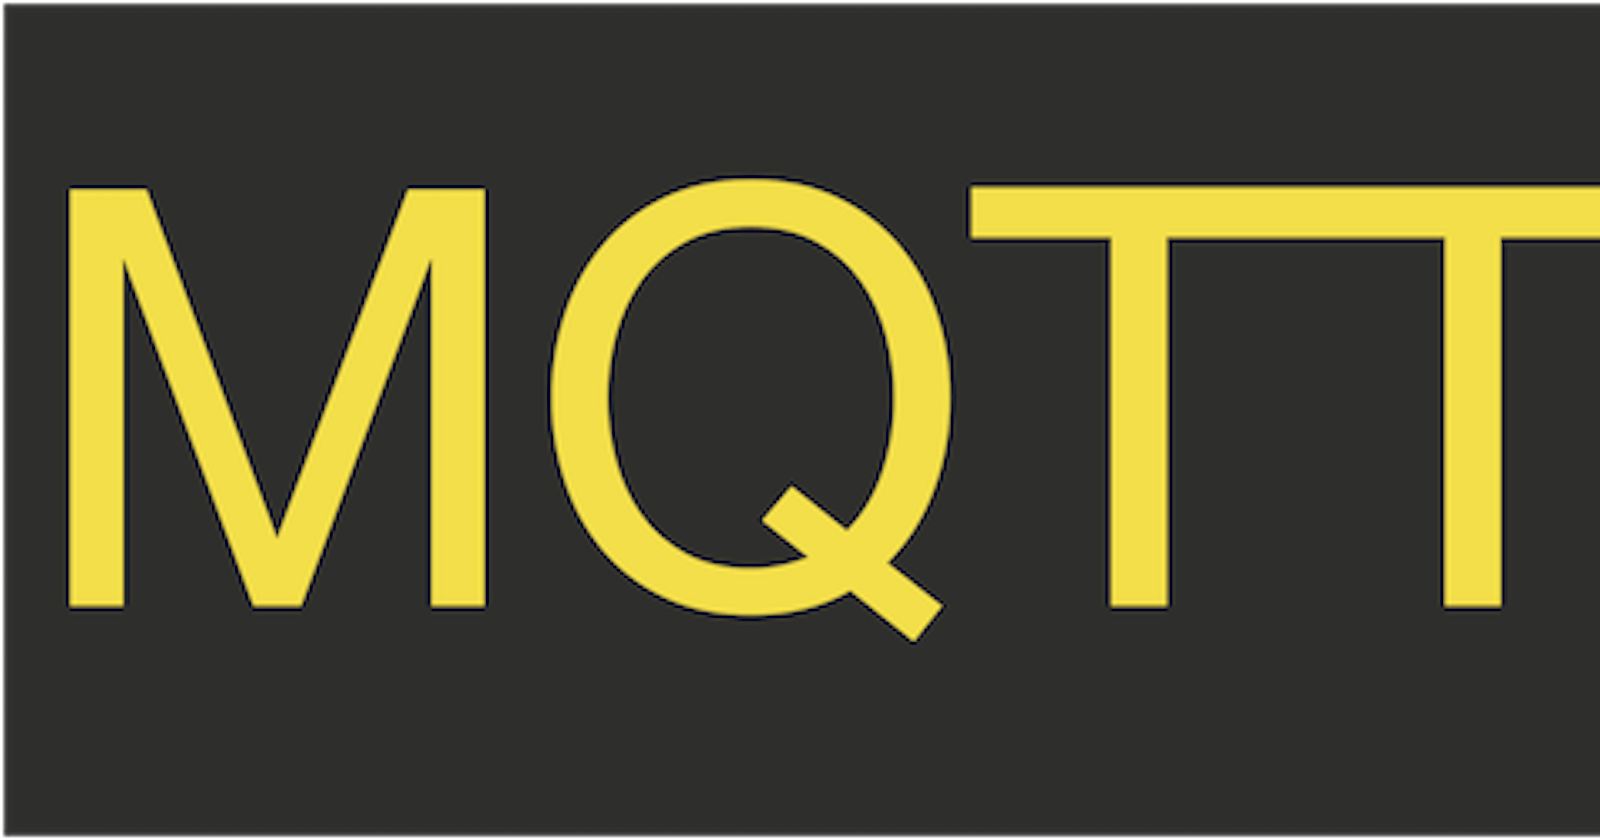 Handle MQTT in a browser with MQTT.js